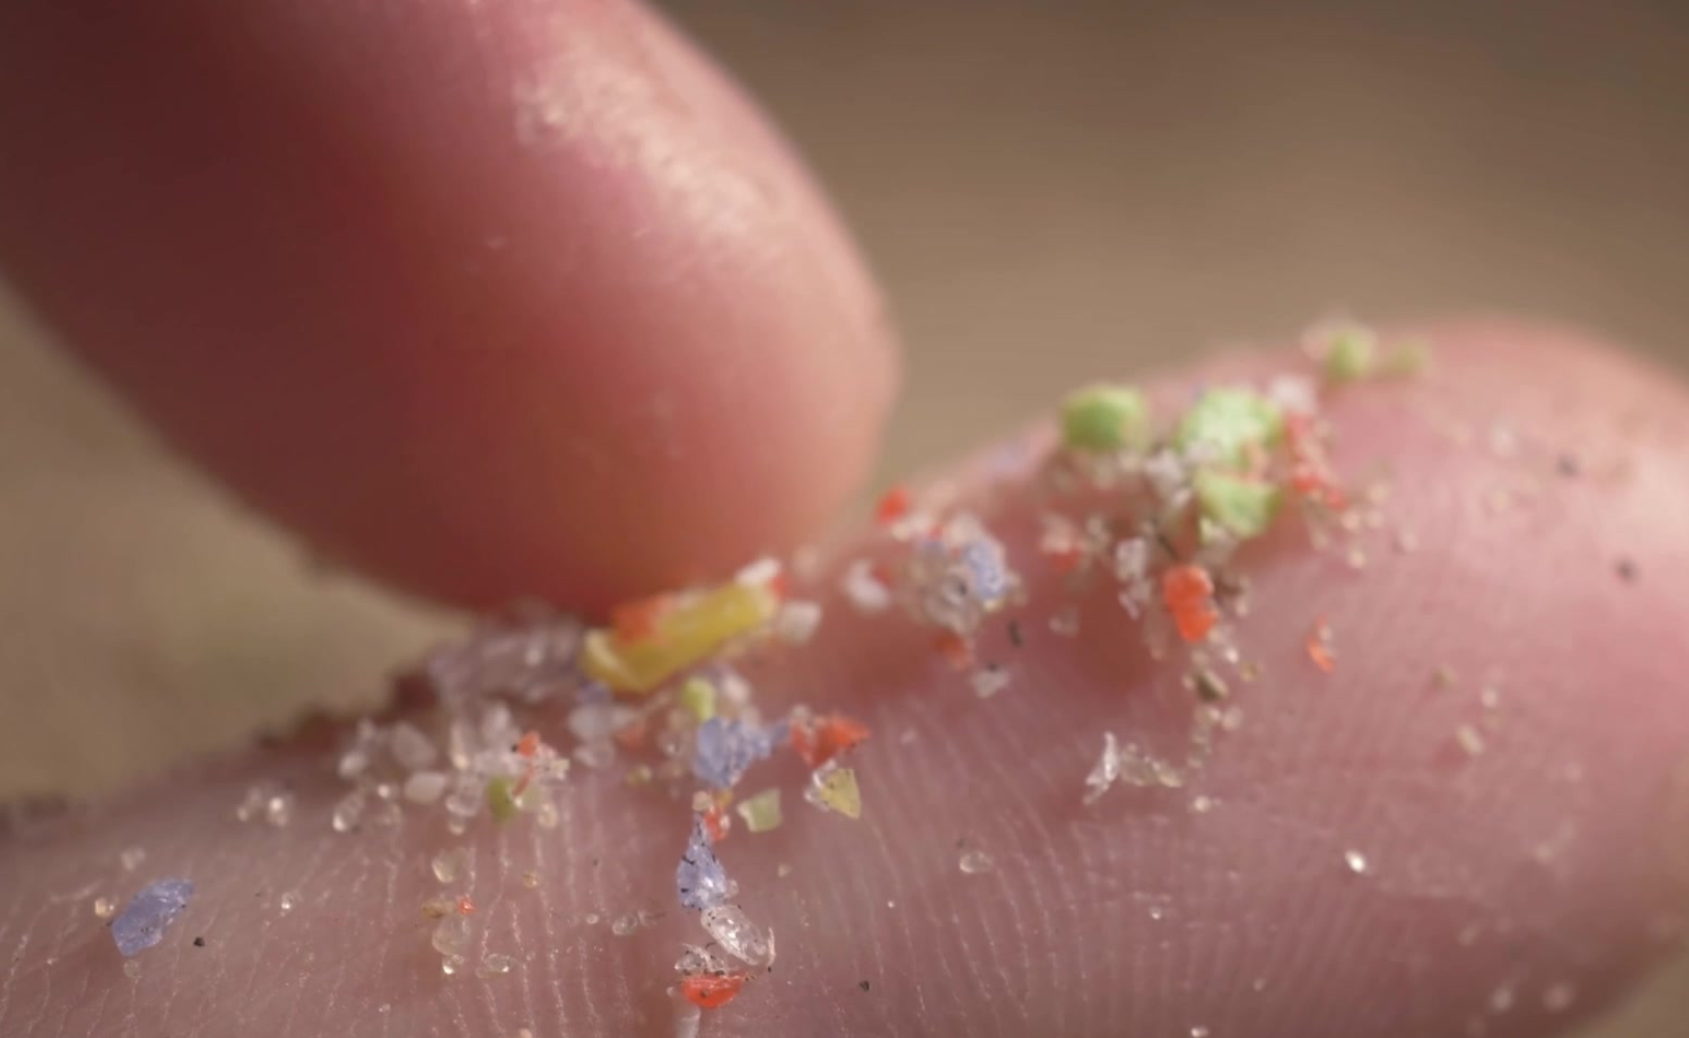 Image of colorful micro plastics on a finger